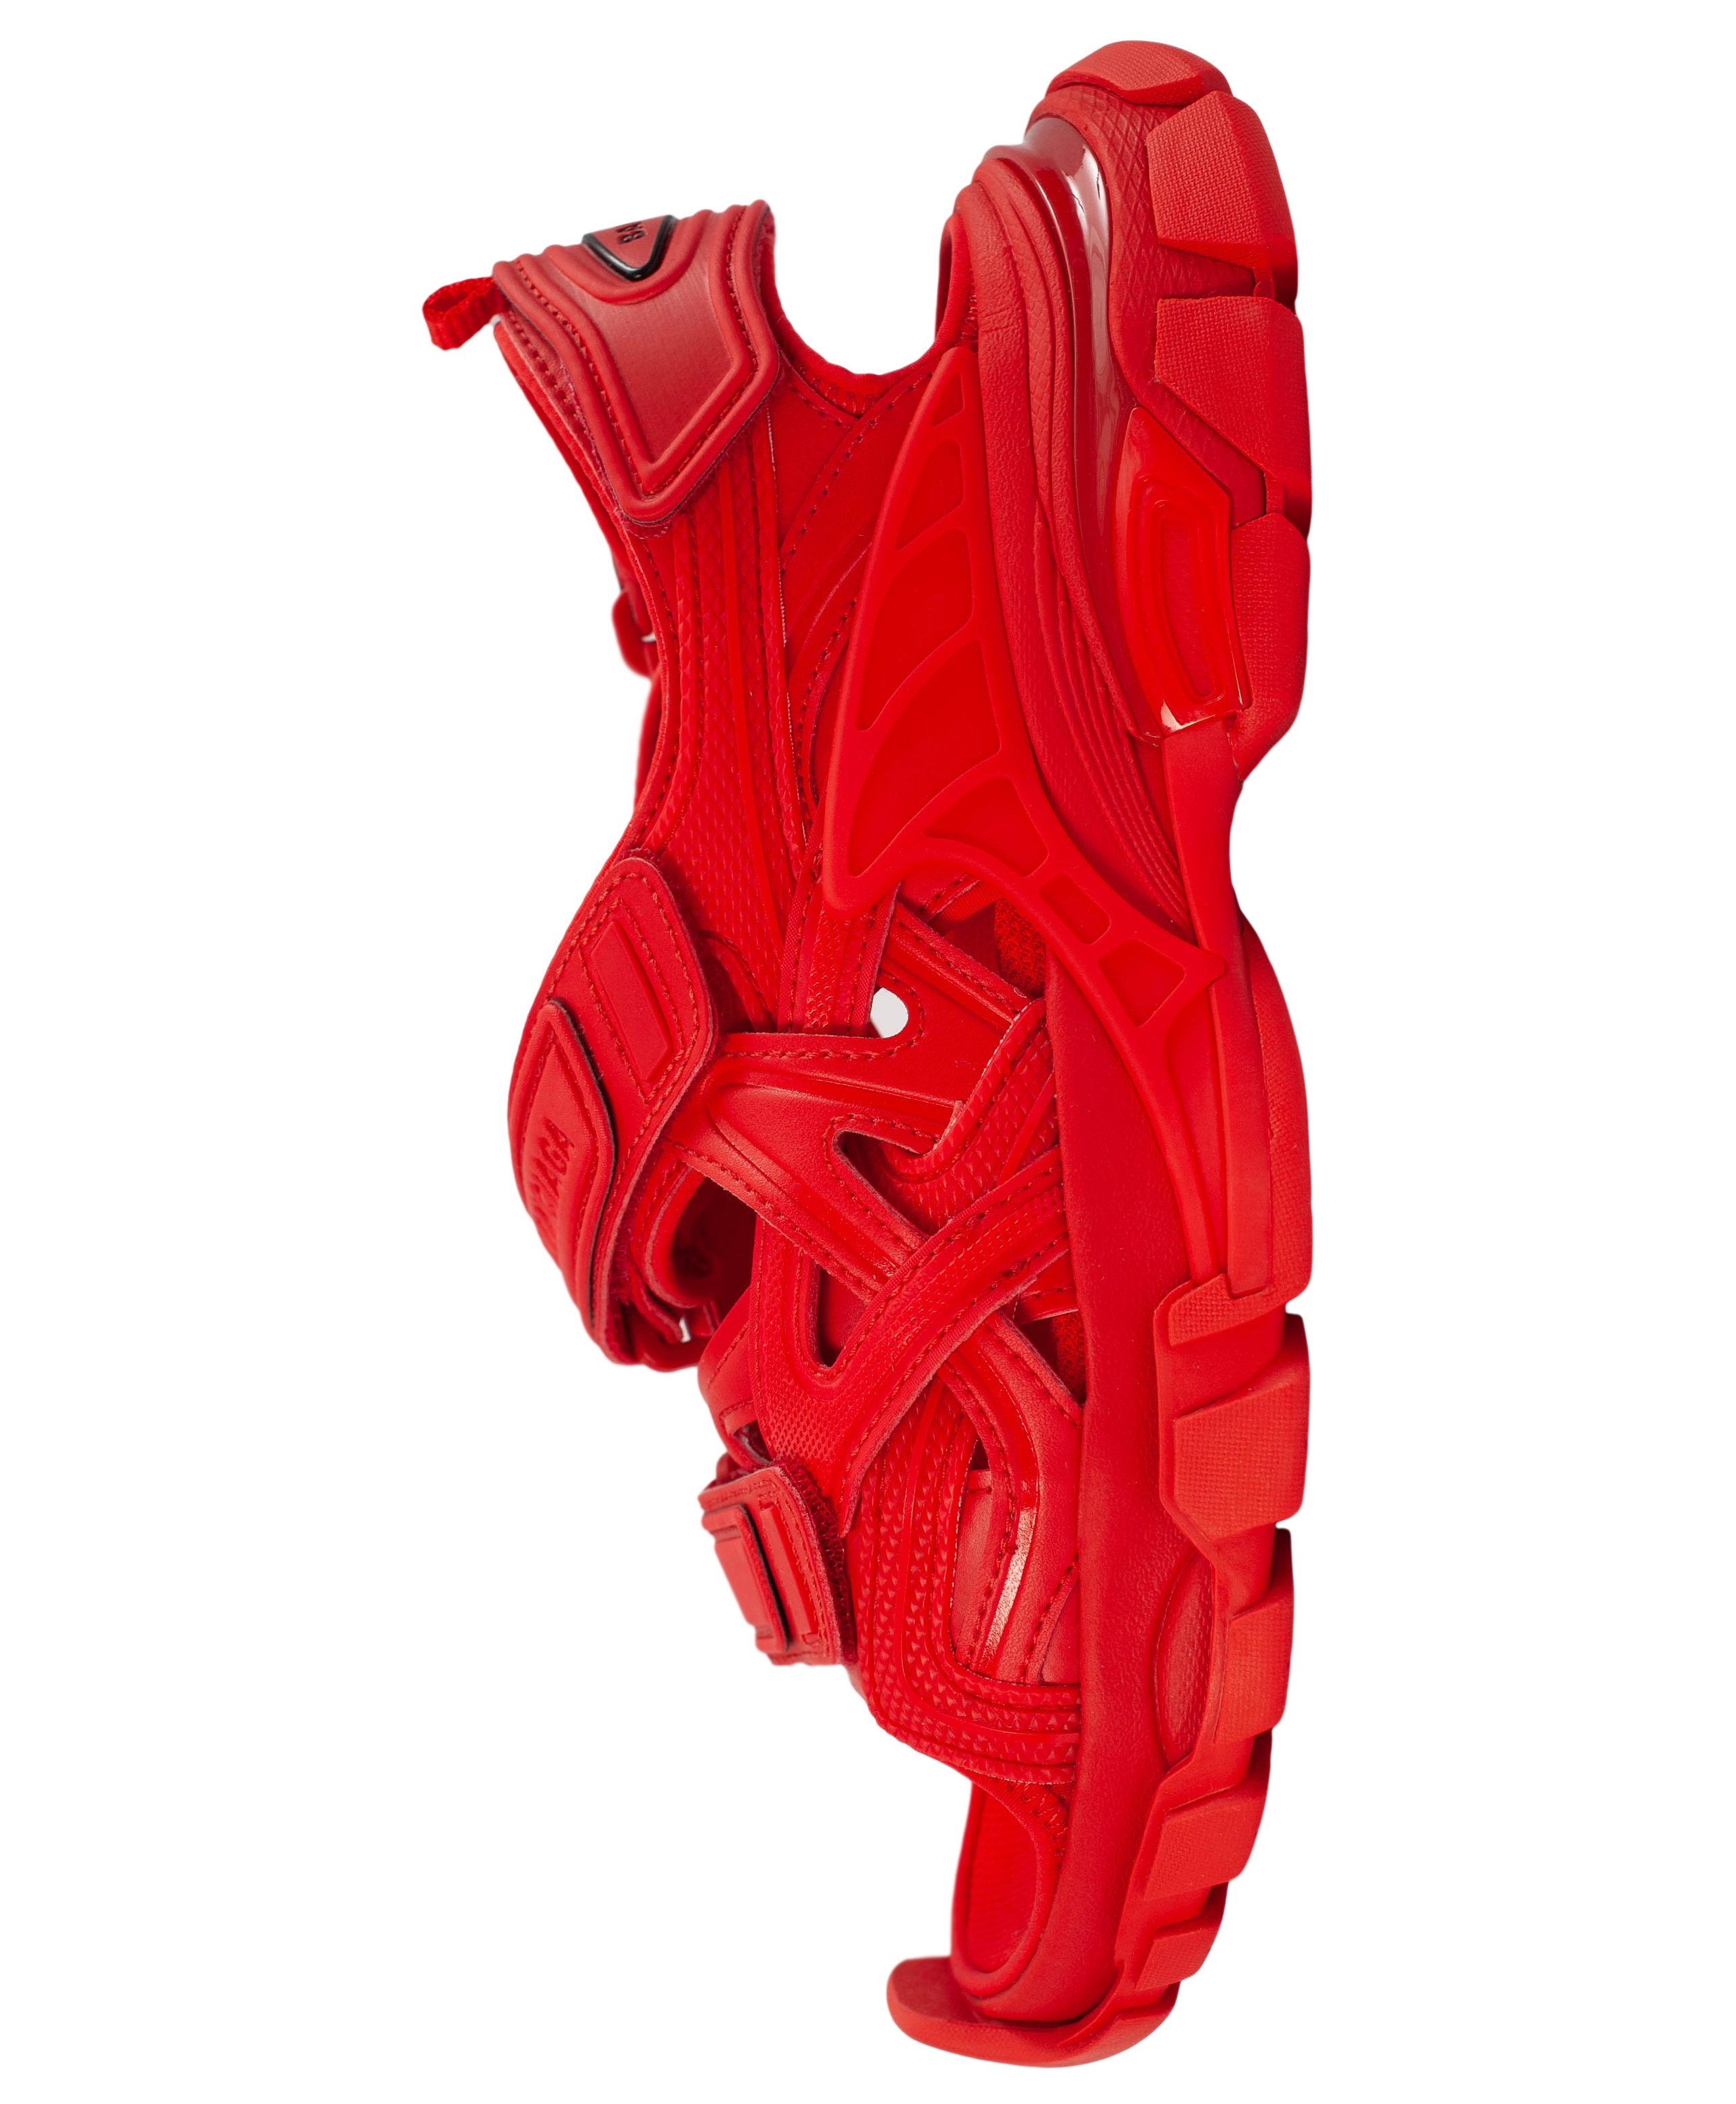 Buy Balenciaga women red track sandals for $930 online on SV77,  617543/W2CC1/6000